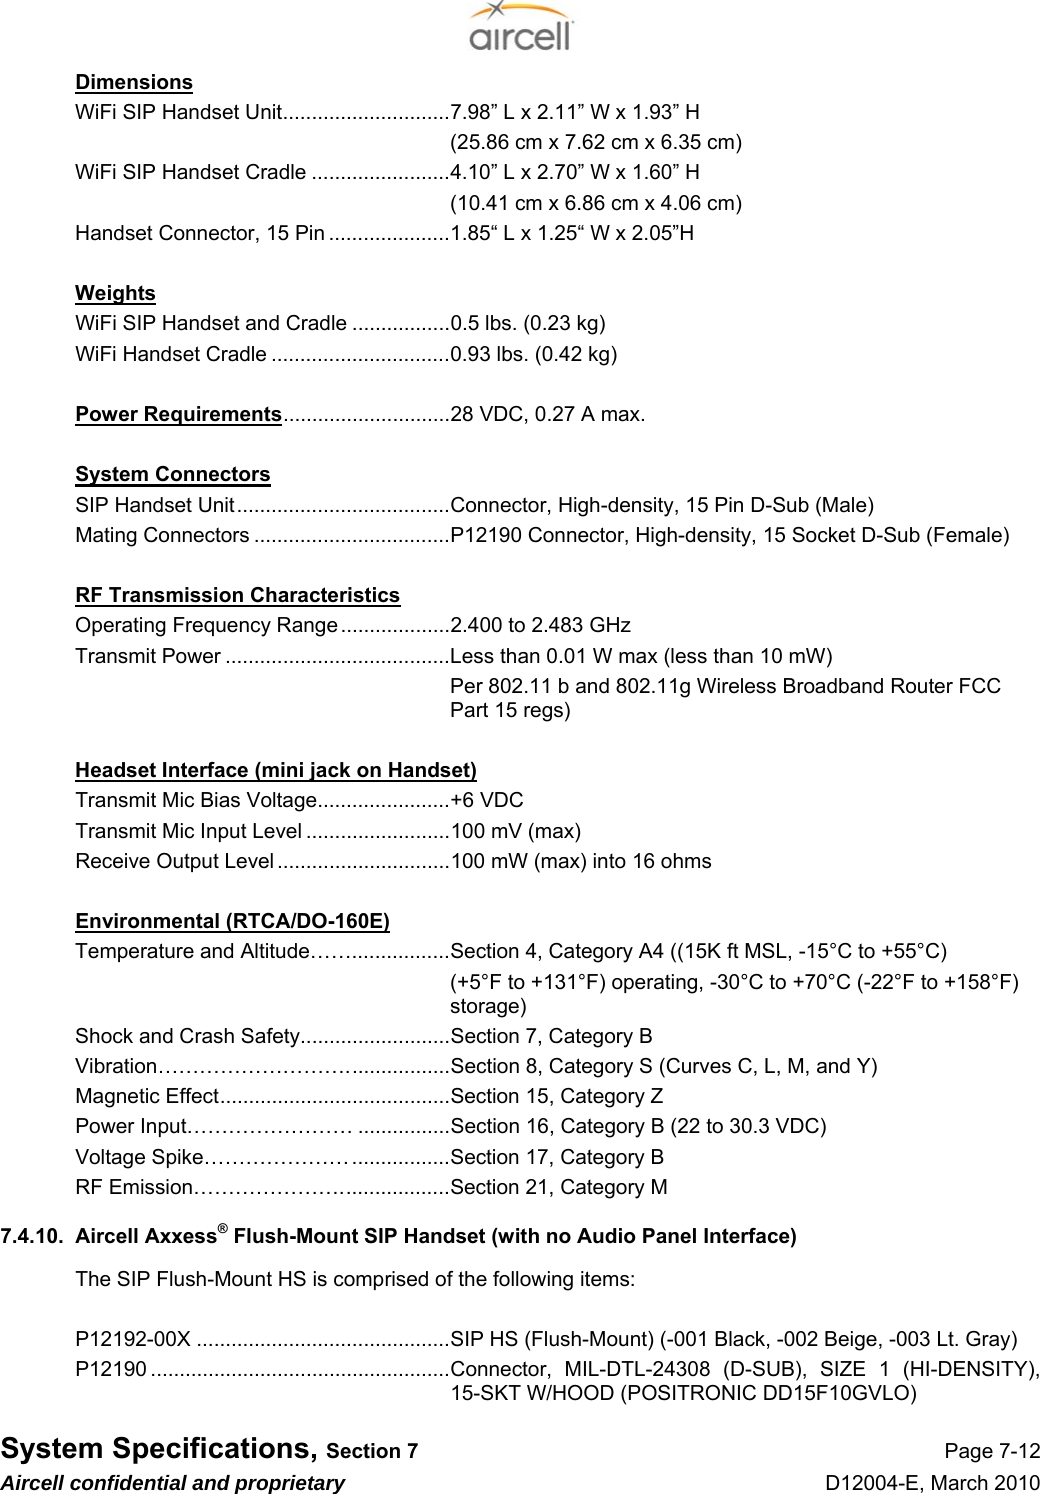  System Specifications, Section 7 Page 7-12 Aircell confidential and proprietary D12004-E, March 2010 Dimensions WiFi SIP Handset Unit.............................7.98” L x 2.11” W x 1.93” H   (25.86 cm x 7.62 cm x 6.35 cm) WiFi SIP Handset Cradle ........................4.10” L x 2.70” W x 1.60” H   (10.41 cm x 6.86 cm x 4.06 cm) Handset Connector, 15 Pin .....................1.85“ L x 1.25“ W x 2.05”H  Weights WiFi SIP Handset and Cradle .................0.5 lbs. (0.23 kg) WiFi Handset Cradle ...............................0.93 lbs. (0.42 kg)  Power Requirements.............................28 VDC, 0.27 A max.   System Connectors SIP Handset Unit.....................................Connector, High-density, 15 Pin D-Sub (Male) Mating Connectors ..................................P12190 Connector, High-density, 15 Socket D-Sub (Female)  RF Transmission Characteristics Operating Frequency Range...................2.400 to 2.483 GHz  Transmit Power .......................................Less than 0.01 W max (less than 10 mW) Per 802.11 b and 802.11g Wireless Broadband Router FCC Part 15 regs)  Headset Interface (mini jack on Handset) Transmit Mic Bias Voltage.......................+6 VDC Transmit Mic Input Level .........................100 mV (max) Receive Output Level ..............................100 mW (max) into 16 ohms  Environmental (RTCA/DO-160E) Temperature and Altitude…….................Section 4, Category A4 ((15K ft MSL, -15°C to +55°C) (+5°F to +131°F) operating, -30°C to +70°C (-22°F to +158°F) storage) Shock and Crash Safety..........................Section 7, Category B Vibration………………………..................Section 8, Category S (Curves C, L, M, and Y) Magnetic Effect........................................Section 15, Category Z Power Input…………………… ................Section 16, Category B (22 to 30.3 VDC) Voltage Spike………………….................Section 17, Category B RF Emission…………………...................Section 21, Category M 7.4.10.  Aircell Axxess® Flush-Mount SIP Handset (with no Audio Panel Interface) The SIP Flush-Mount HS is comprised of the following items:  P12192-00X ............................................SIP HS (Flush-Mount) (-001 Black, -002 Beige, -003 Lt. Gray) P12190 ....................................................Connector, MIL-DTL-24308 (D-SUB), SIZE 1 (HI-DENSITY), 15-SKT W/HOOD (POSITRONIC DD15F10GVLO) 